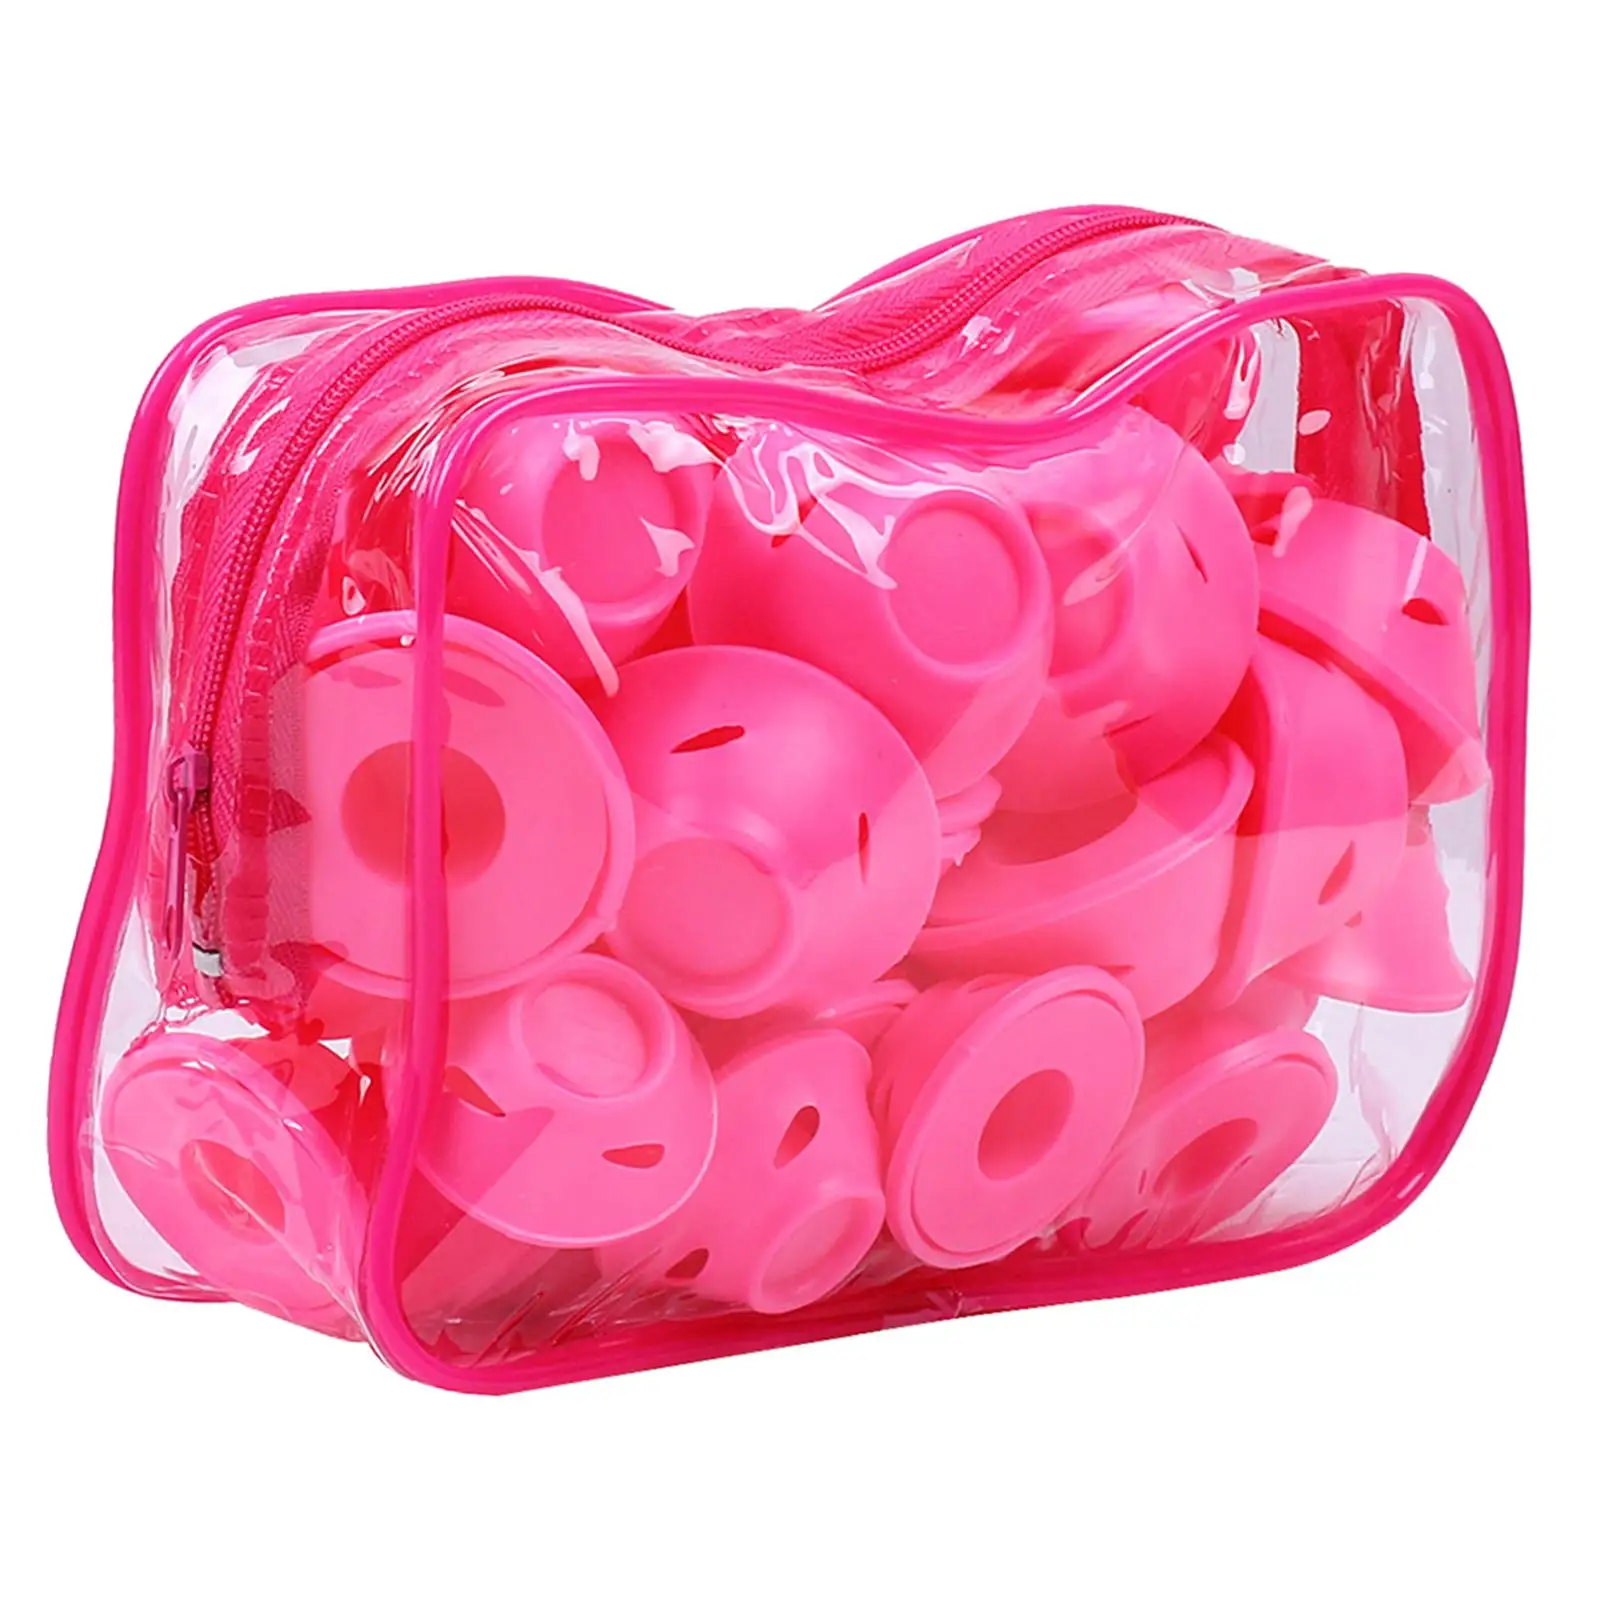 30x Hair Rollers Non Heating Silicone Hair Accessories Curling for Natural Curls